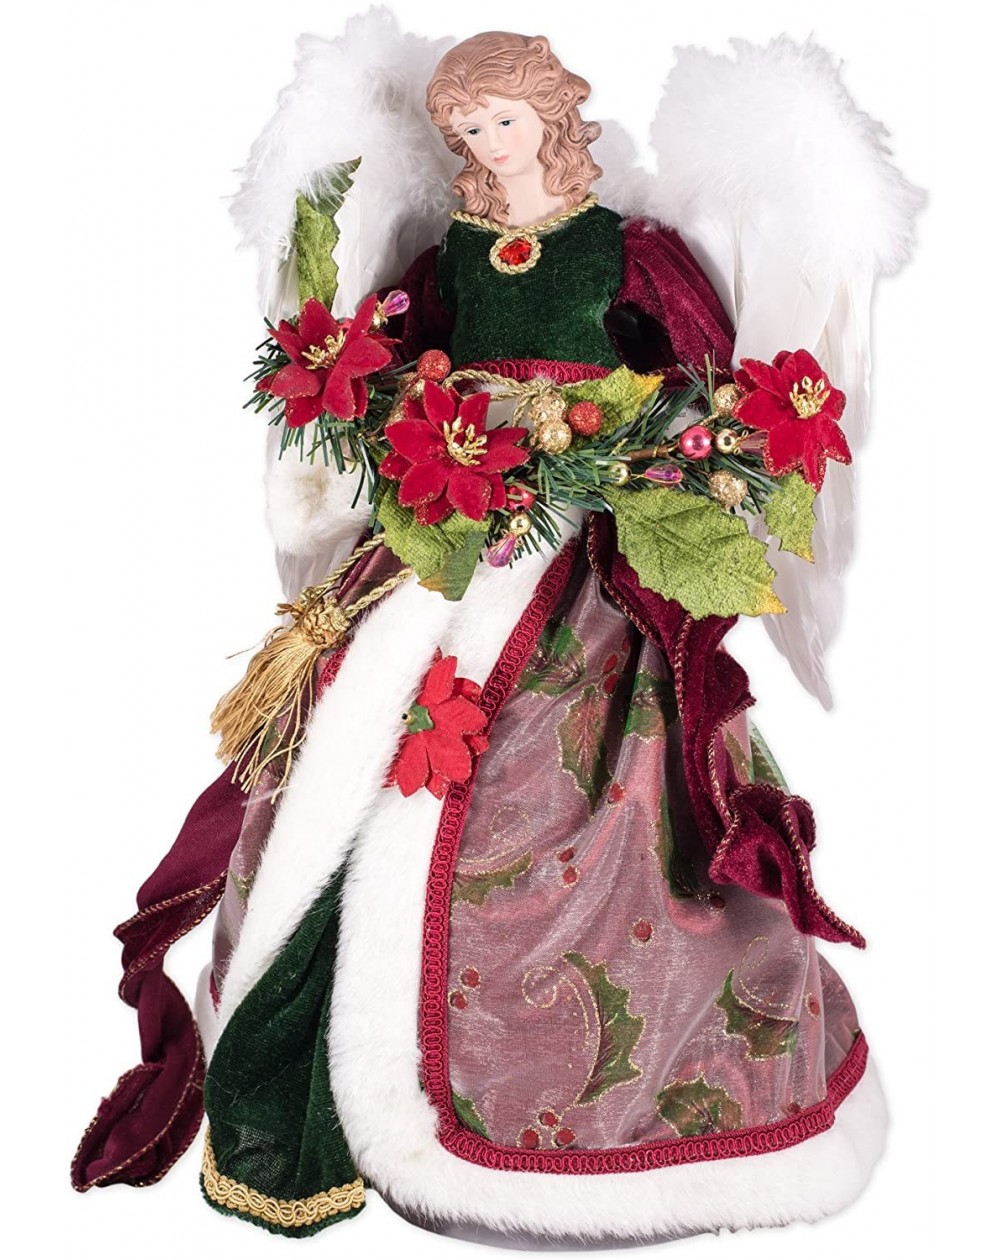 Tree Toppers Elegant Rosy Red Holly Gown Angel 16 inch Decorative Tree Topper - CW11KMB4F8R $39.23